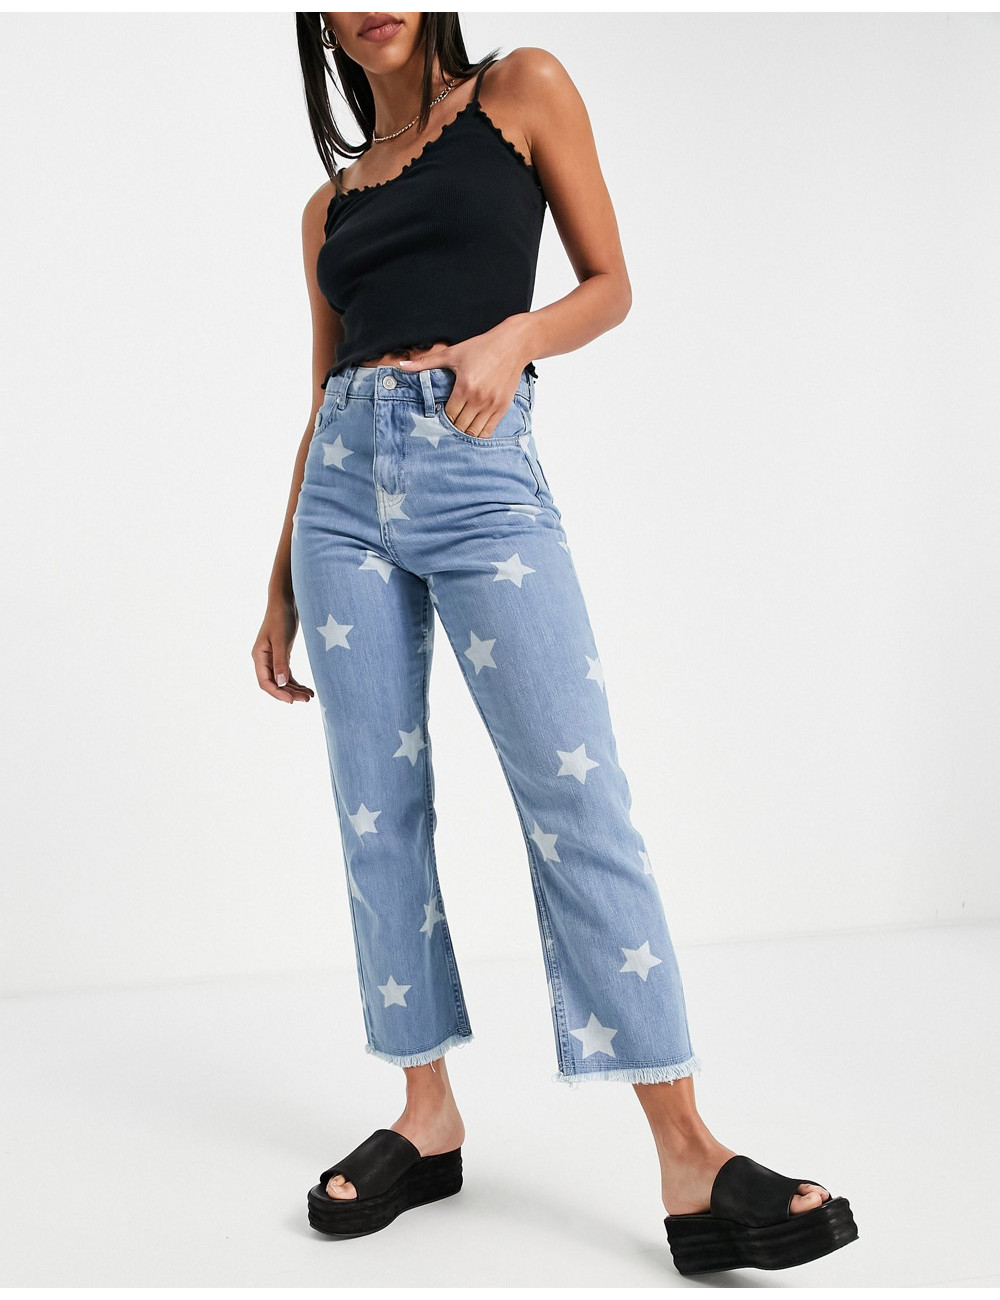 Violet Romance jeans with...